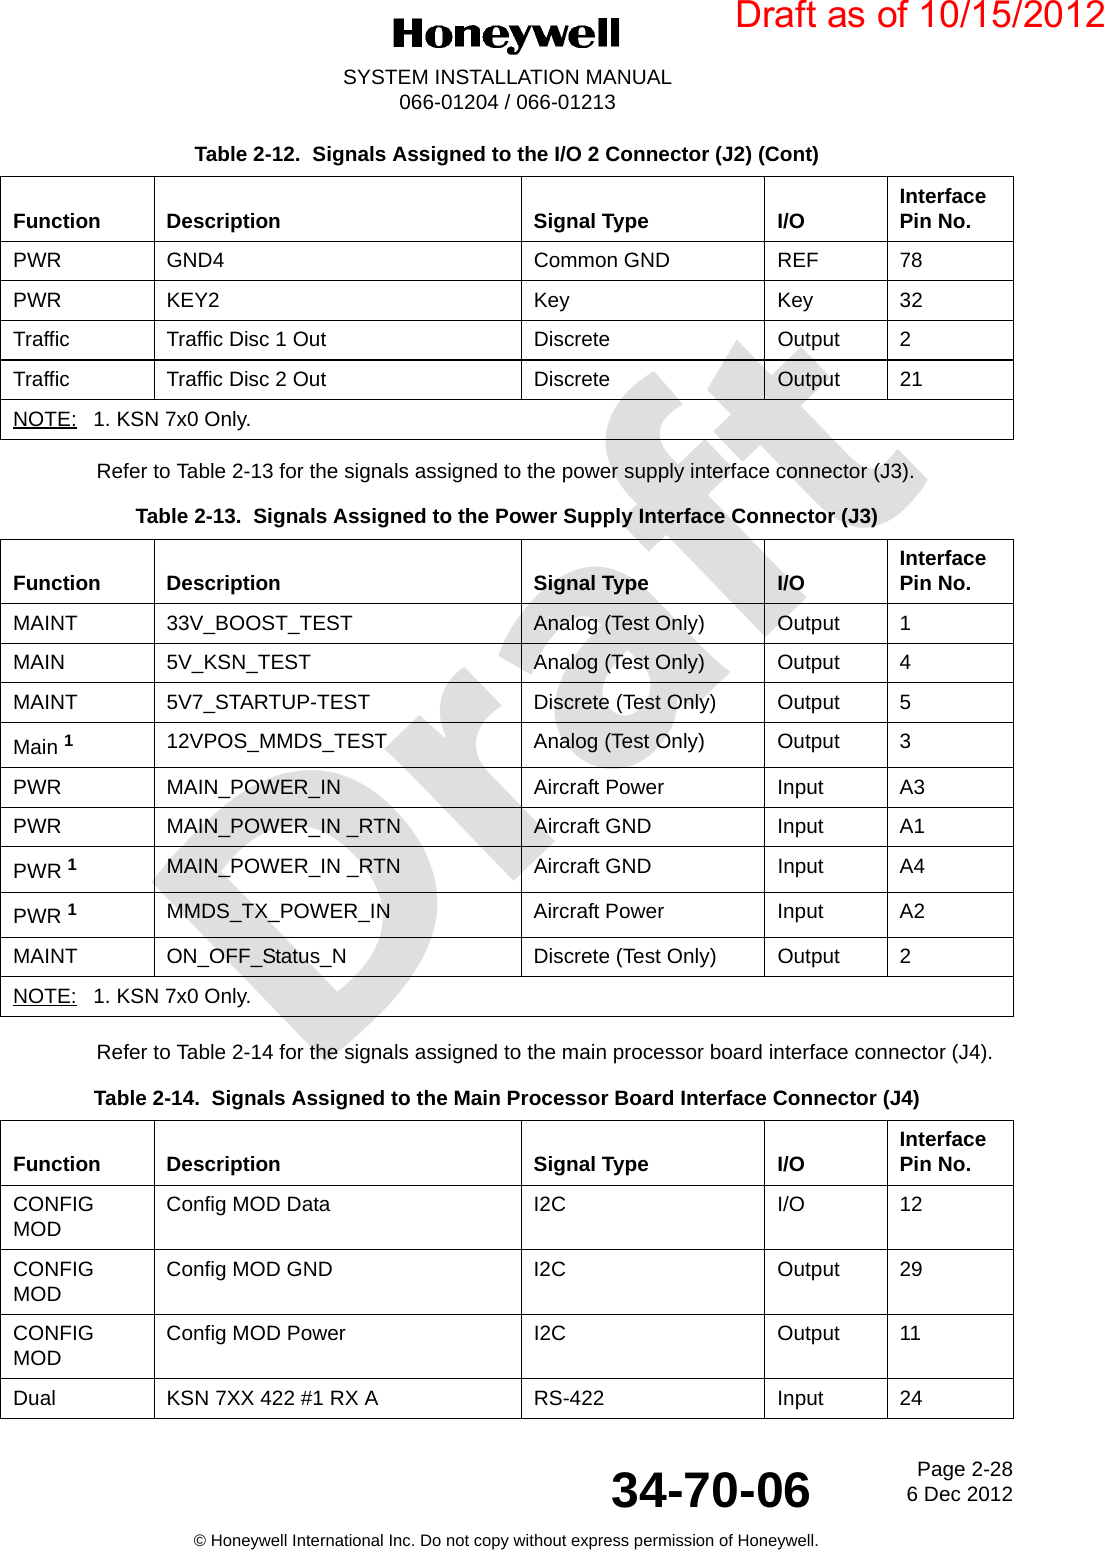 DraftPage 2-286 Dec 201234-70-06SYSTEM INSTALLATION MANUAL066-01204 / 066-01213© Honeywell International Inc. Do not copy without express permission of Honeywell.Refer to Table 2-13 for the signals assigned to the power supply interface connector (J3).Refer to Table 2-14 for the signals assigned to the main processor board interface connector (J4).PWR GND4 Common GND REF 78PWR KEY2 Key Key 32Traffic Traffic Disc 1 Out Discrete Output 2Traffic Traffic Disc 2 Out Discrete Output 21NOTE: 1. KSN 7x0 Only.Table 2-13.  Signals Assigned to the Power Supply Interface Connector (J3) Function Description Signal Type I/O Interface Pin No.MAINT 33V_BOOST_TEST Analog (Test Only) Output 1MAIN 5V_KSN_TEST Analog (Test Only) Output 4MAINT 5V7_STARTUP-TEST Discrete (Test Only) Output 5Main 112VPOS_MMDS_TEST Analog (Test Only) Output 3PWR MAIN_POWER_IN Aircraft Power Input A3PWR MAIN_POWER_IN _RTN Aircraft GND Input A1PWR 1MAIN_POWER_IN _RTN Aircraft GND Input A4PWR 1MMDS_TX_POWER_IN Aircraft Power Input A2MAINT ON_OFF_Status_N Discrete (Test Only) Output 2NOTE: 1. KSN 7x0 Only.Table 2-14.  Signals Assigned to the Main Processor Board Interface Connector (J4) Function Description Signal Type I/O Interface Pin No.CONFIG MOD Config MOD Data I2C I/O 12CONFIG MOD Config MOD GND I2C Output 29CONFIG MOD Config MOD Power I2C Output 11Dual KSN 7XX 422 #1 RX A RS-422 Input 24Table 2-12.  Signals Assigned to the I/O 2 Connector (J2) (Cont)Function Description Signal Type I/O Interface Pin No.Draft as of 10/15/2012